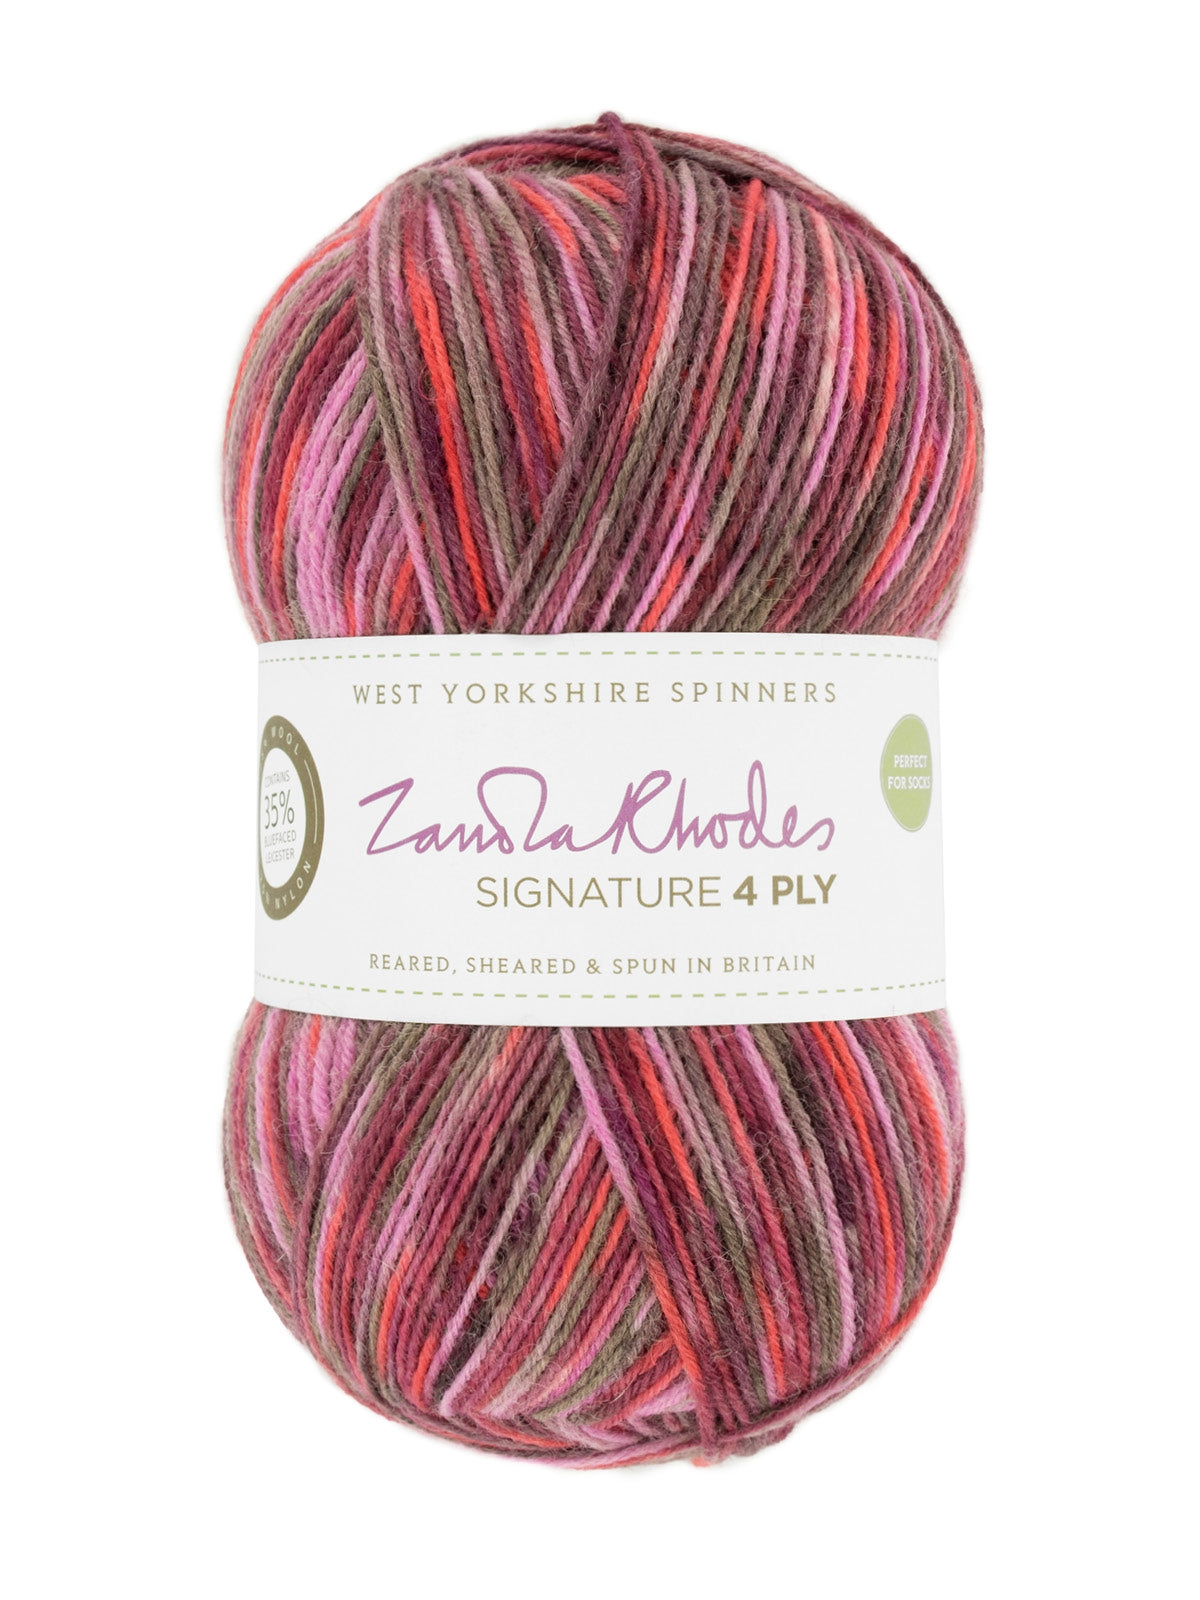 West Yorkshire Spinners Signature 4-Ply - Botanical Bloom